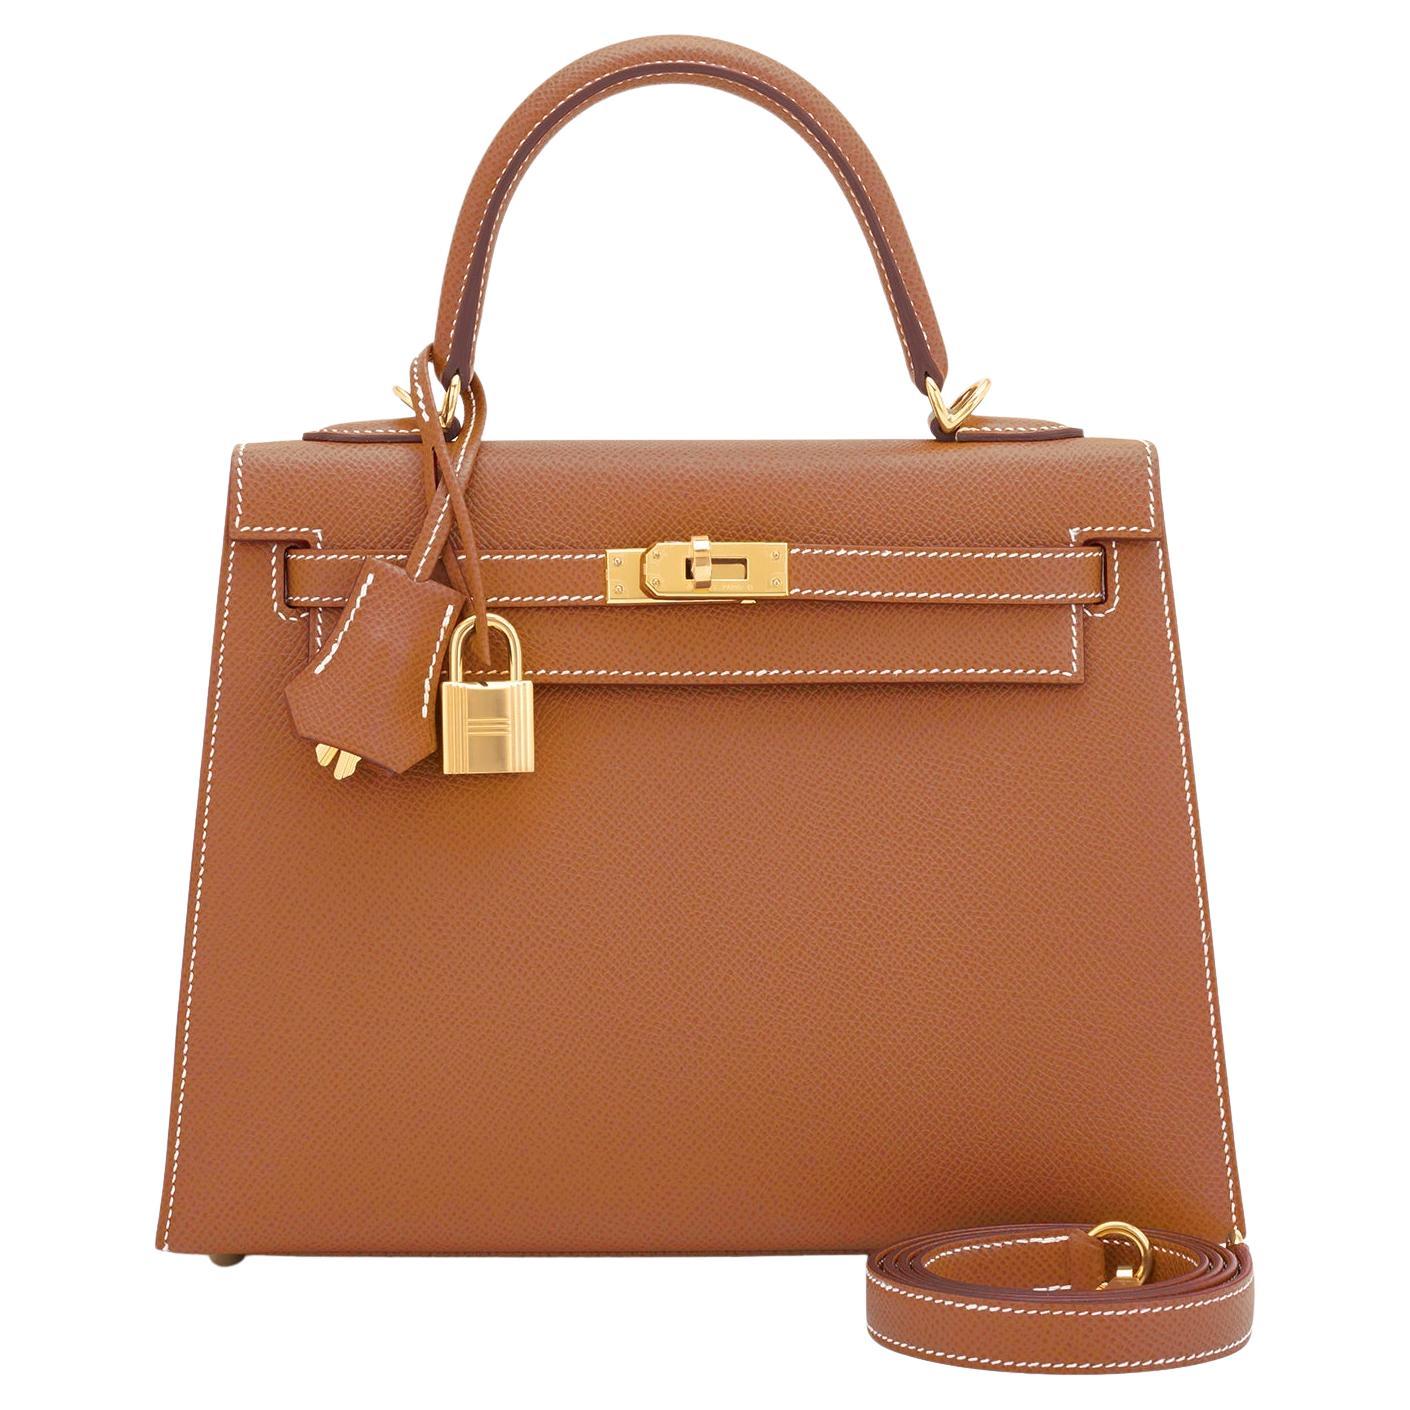 Hermes Gold Kelly 25cm Tan Sellier Umhängetasche NEW IN BOX